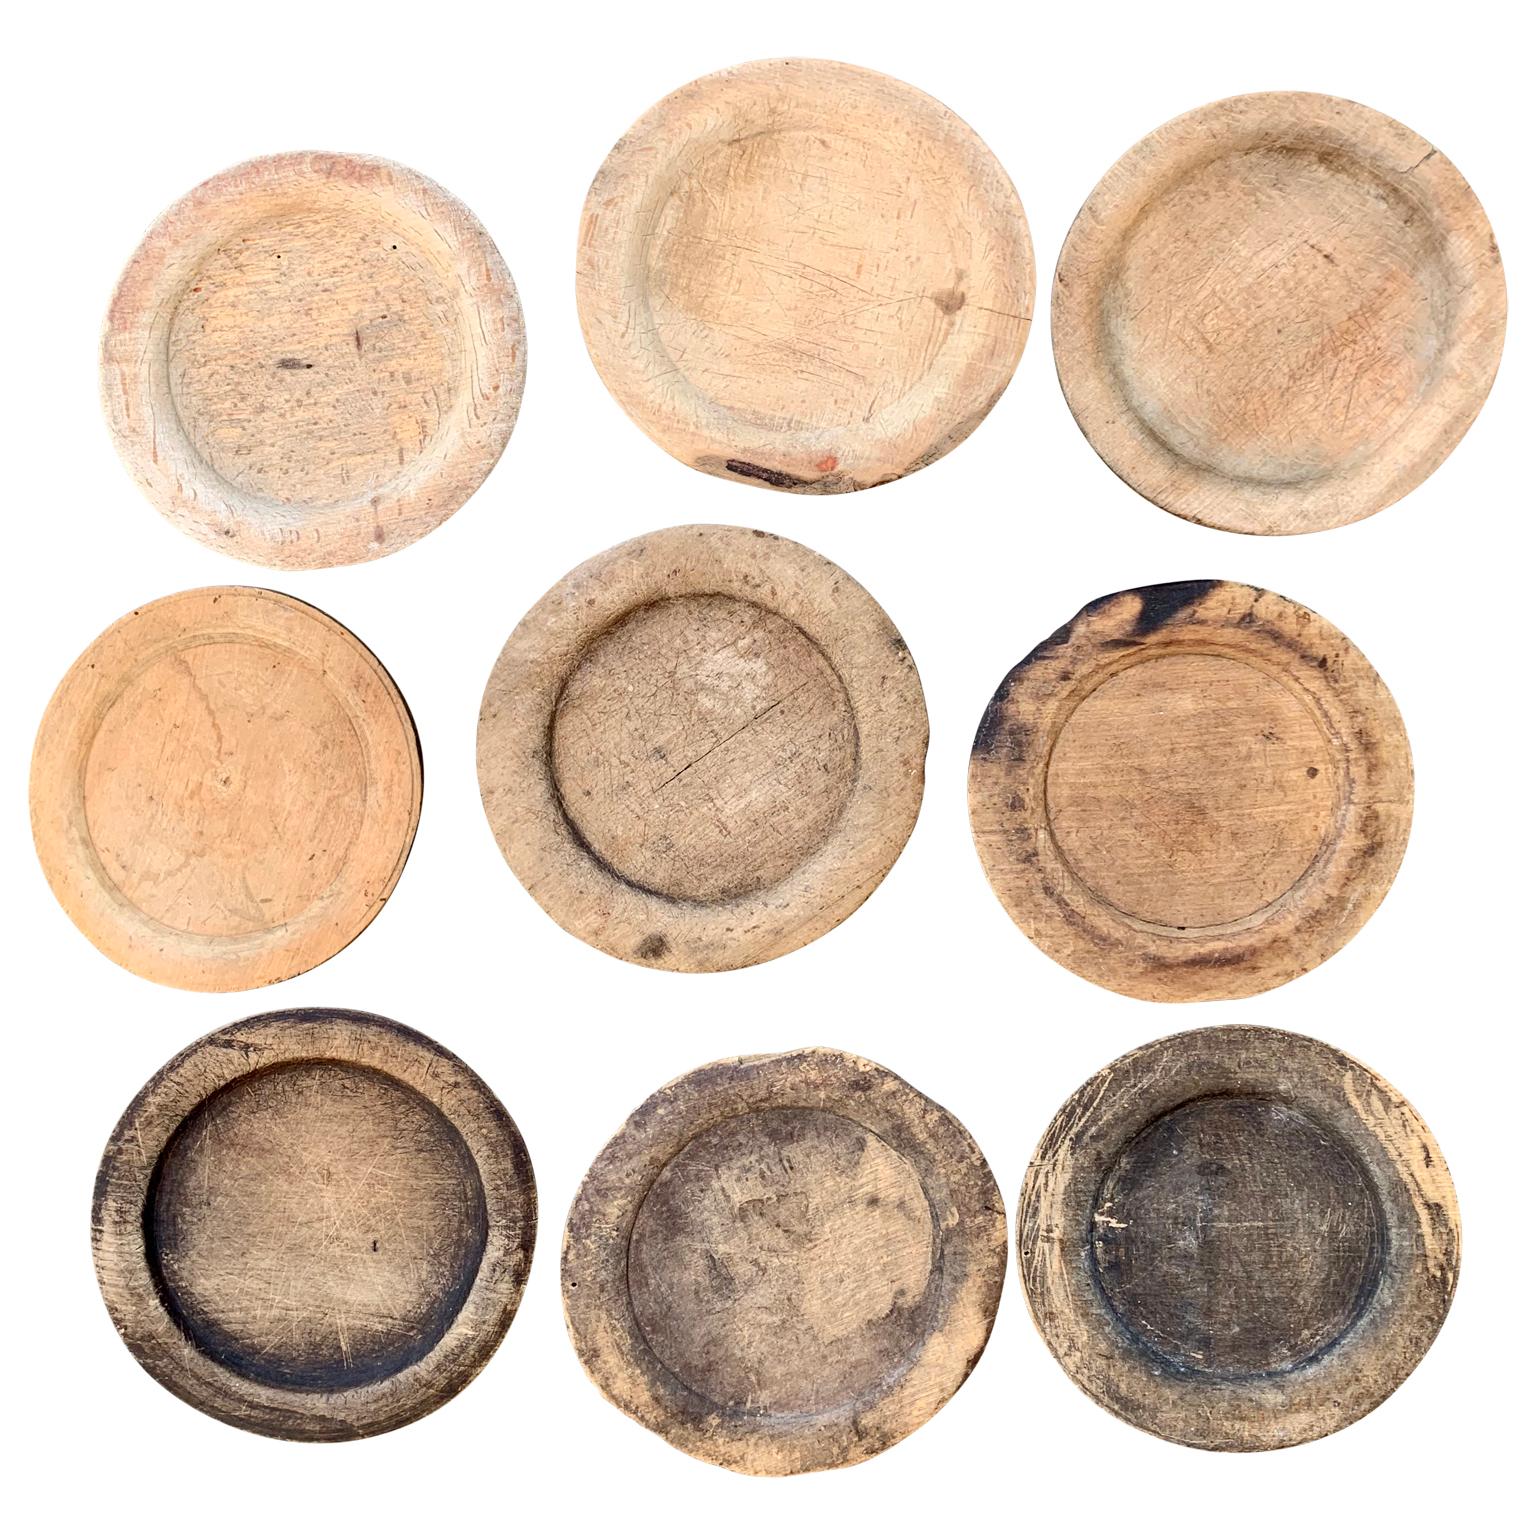 Collection of 9 rustic Folk Art dinner plates of wood, circa 1780s-1880s 
Could be used for trays, serve-ware or under-plates.

Pricing is per item.
Measures: Diameter of the plates range from 17cm to 19cm (between 6.7 inches and 7.5 inches),